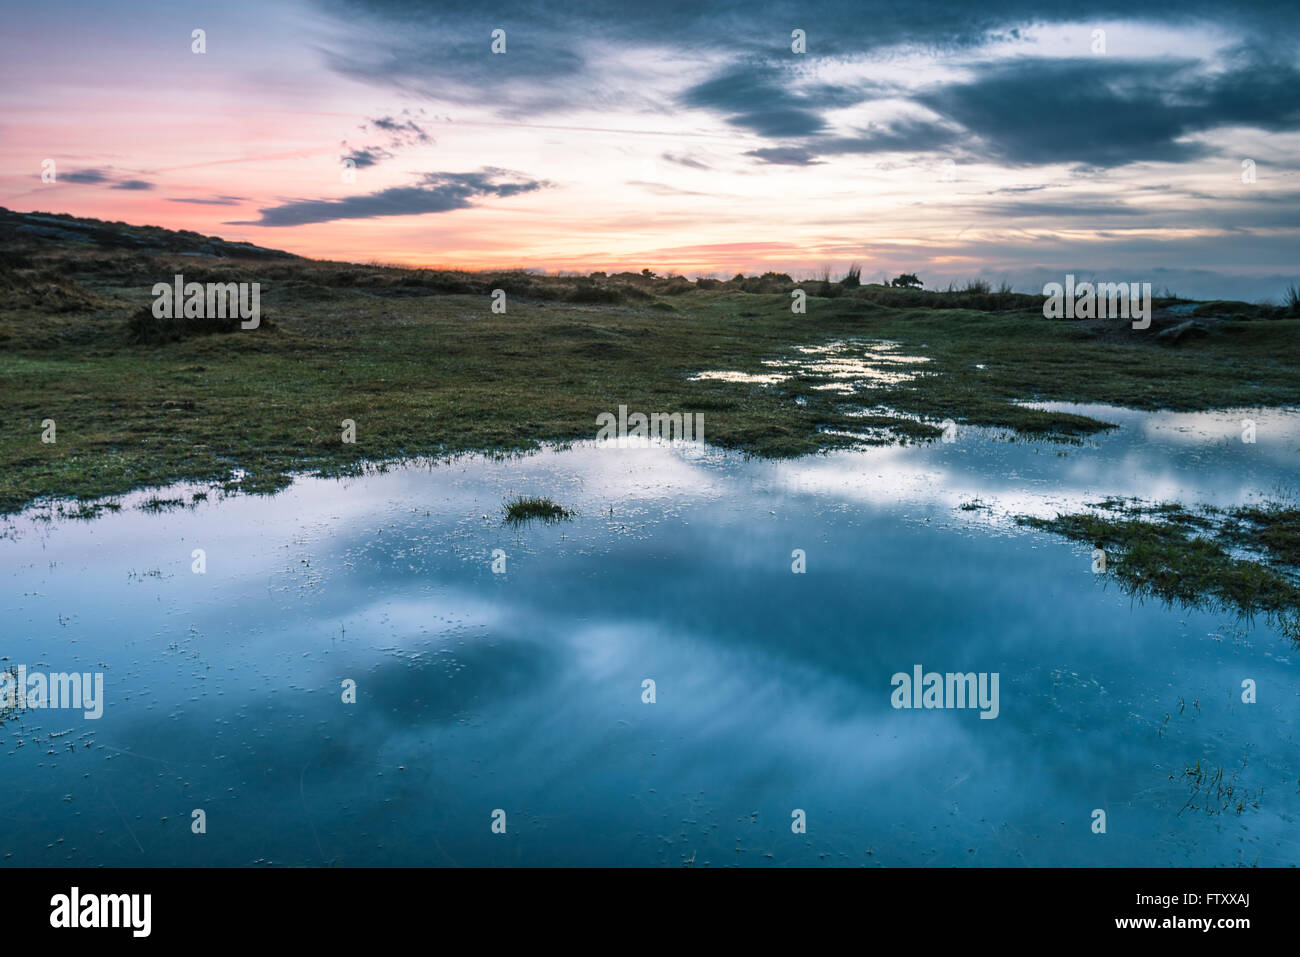 Sky reflection in wild pond at sunset Stock Photo